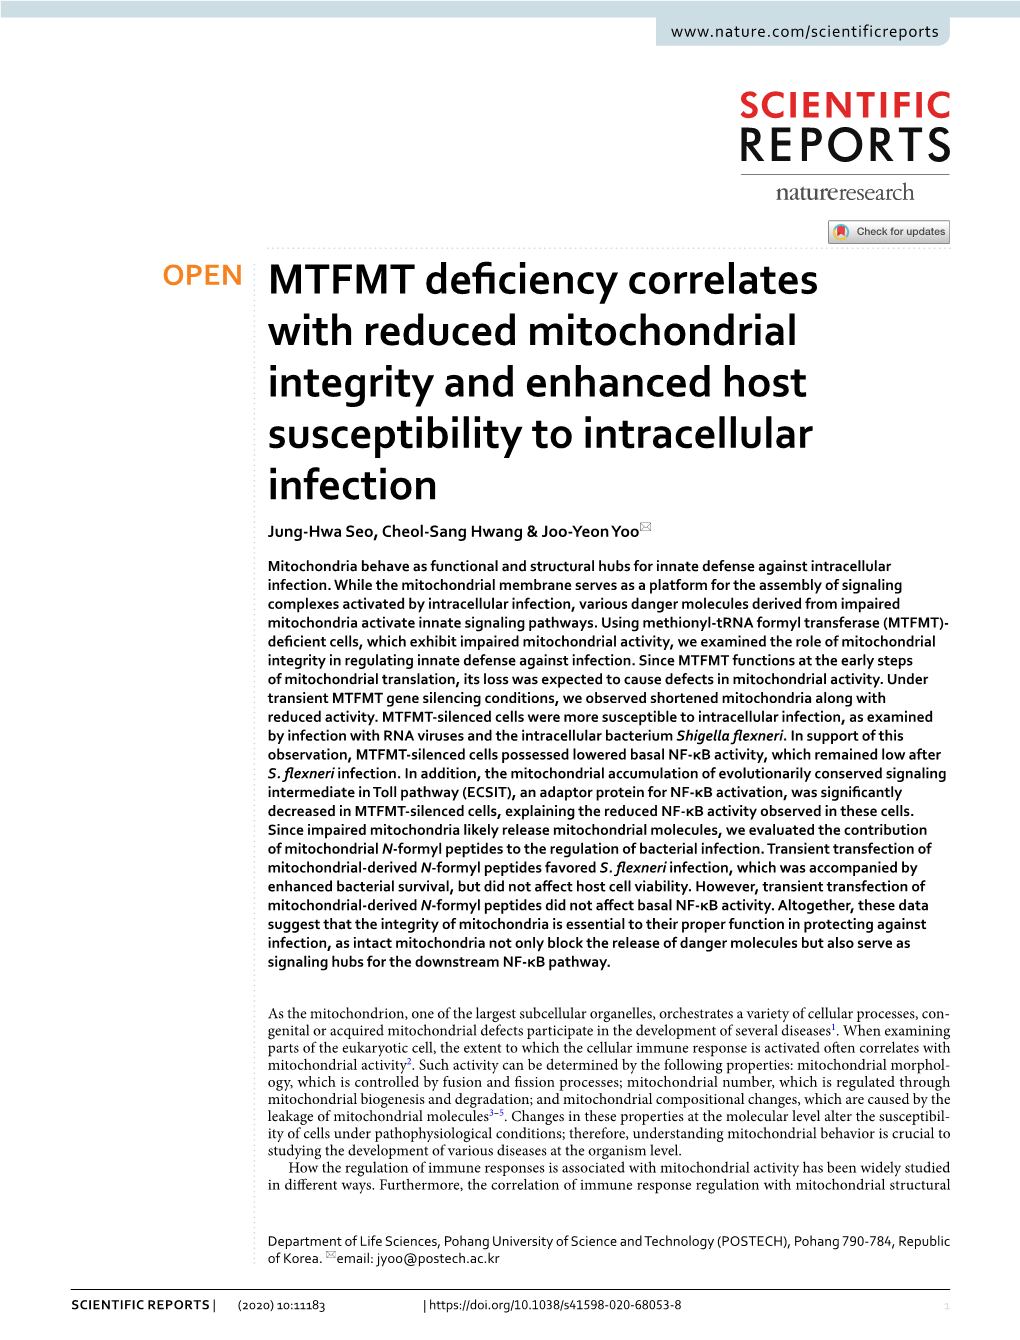 MTFMT Deficiency Correlates with Reduced Mitochondrial Integrity And